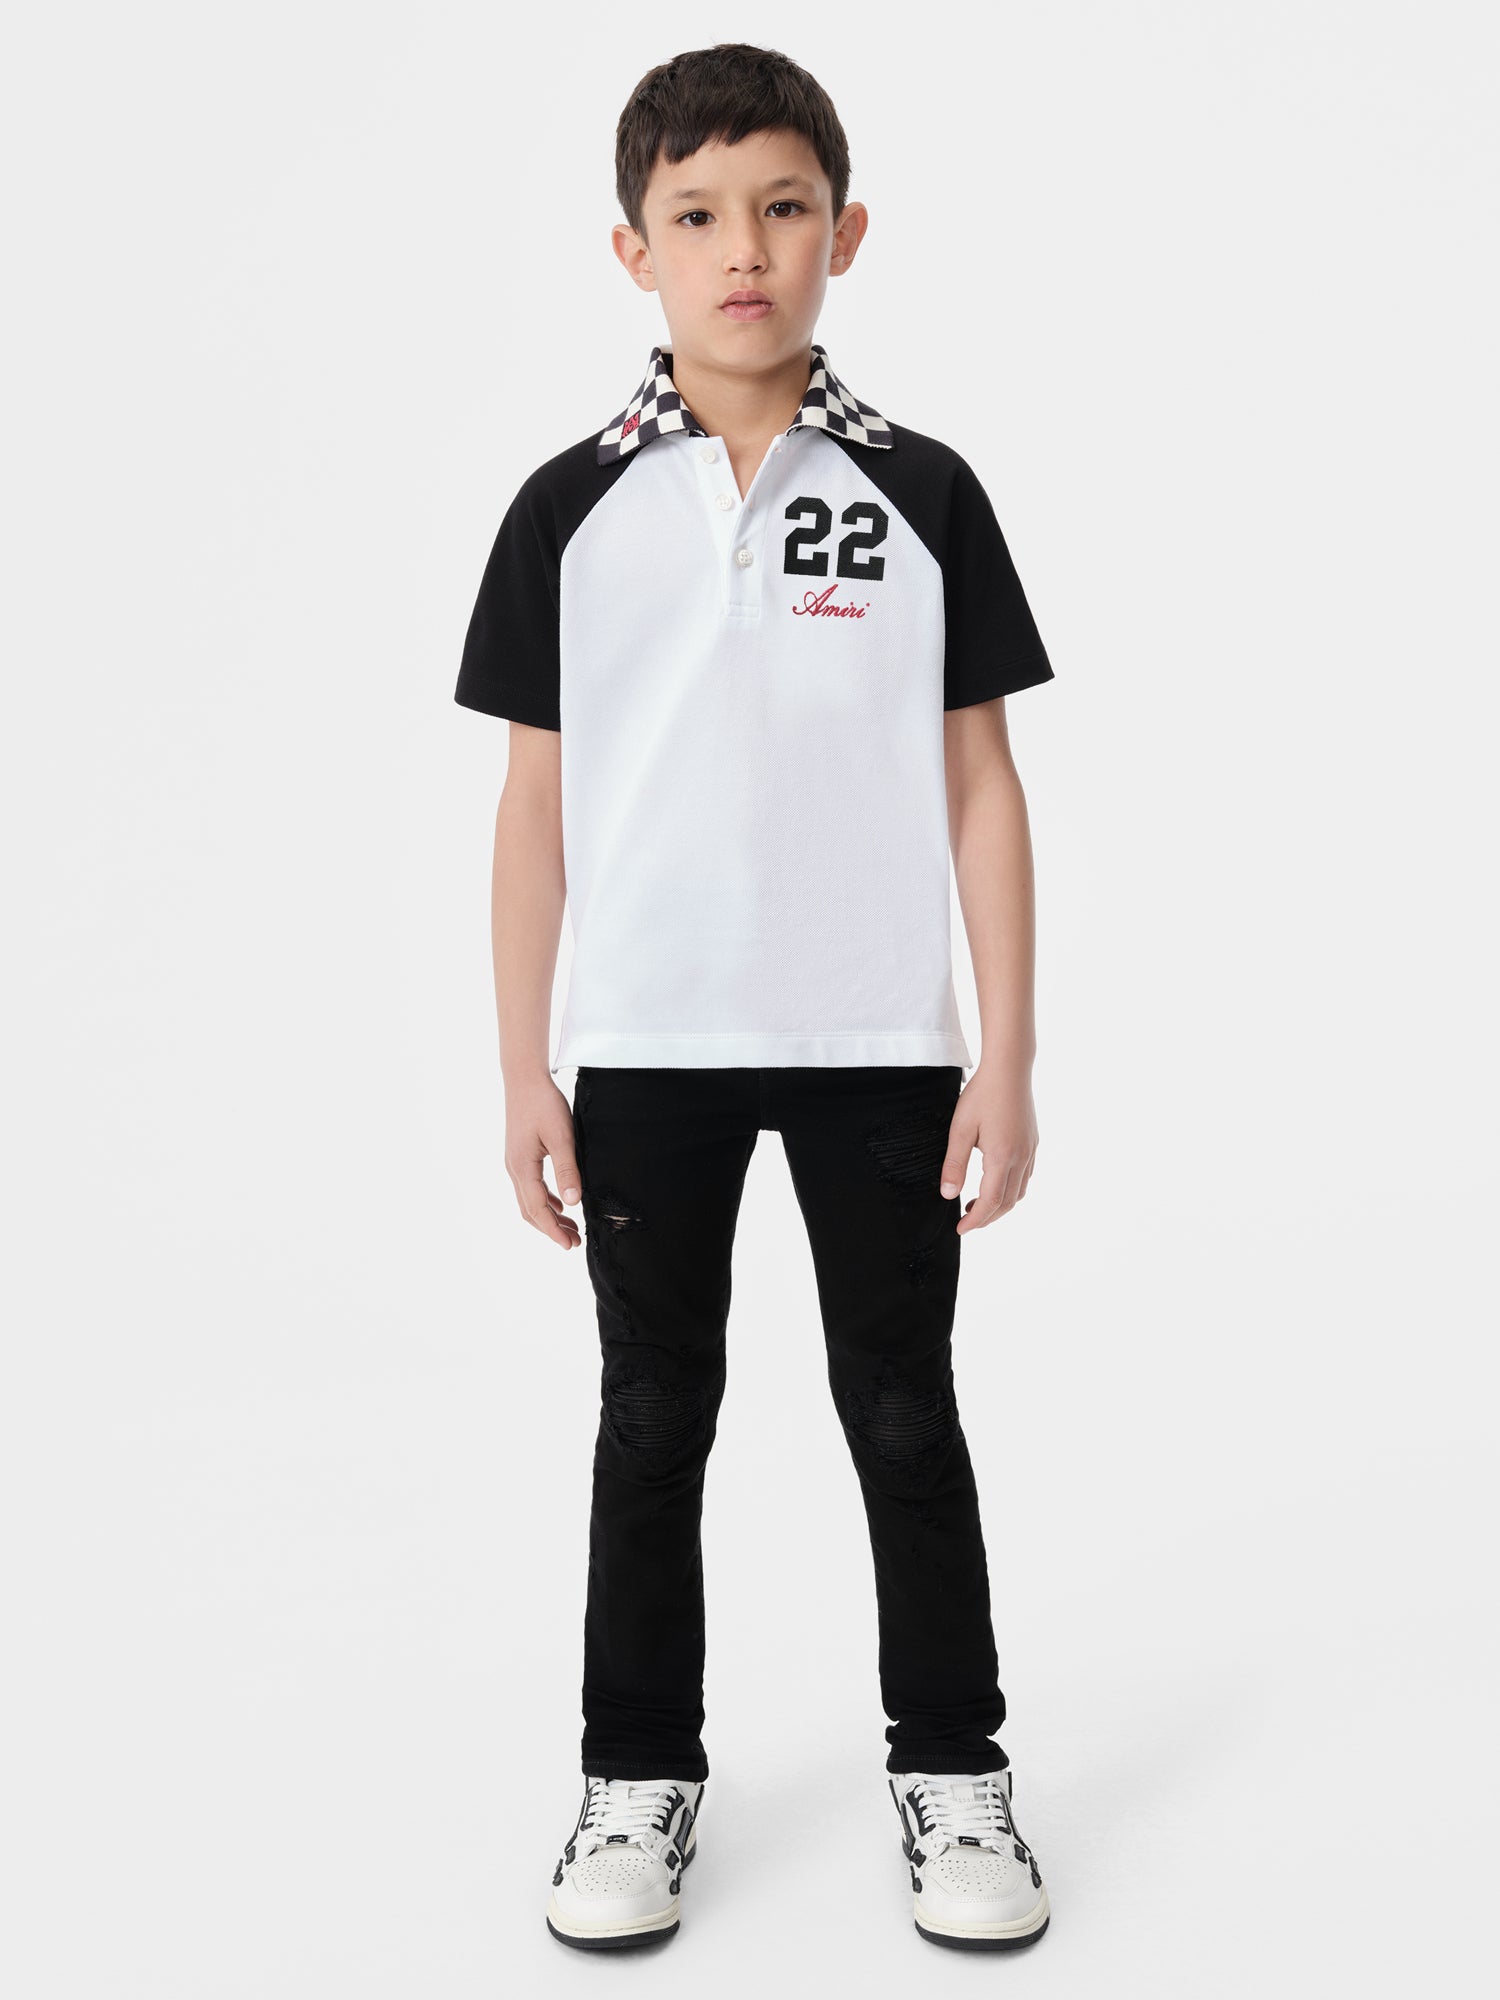 Product KIDS - KIDS' MA CHECKERED 22 POLO - White Black featured image